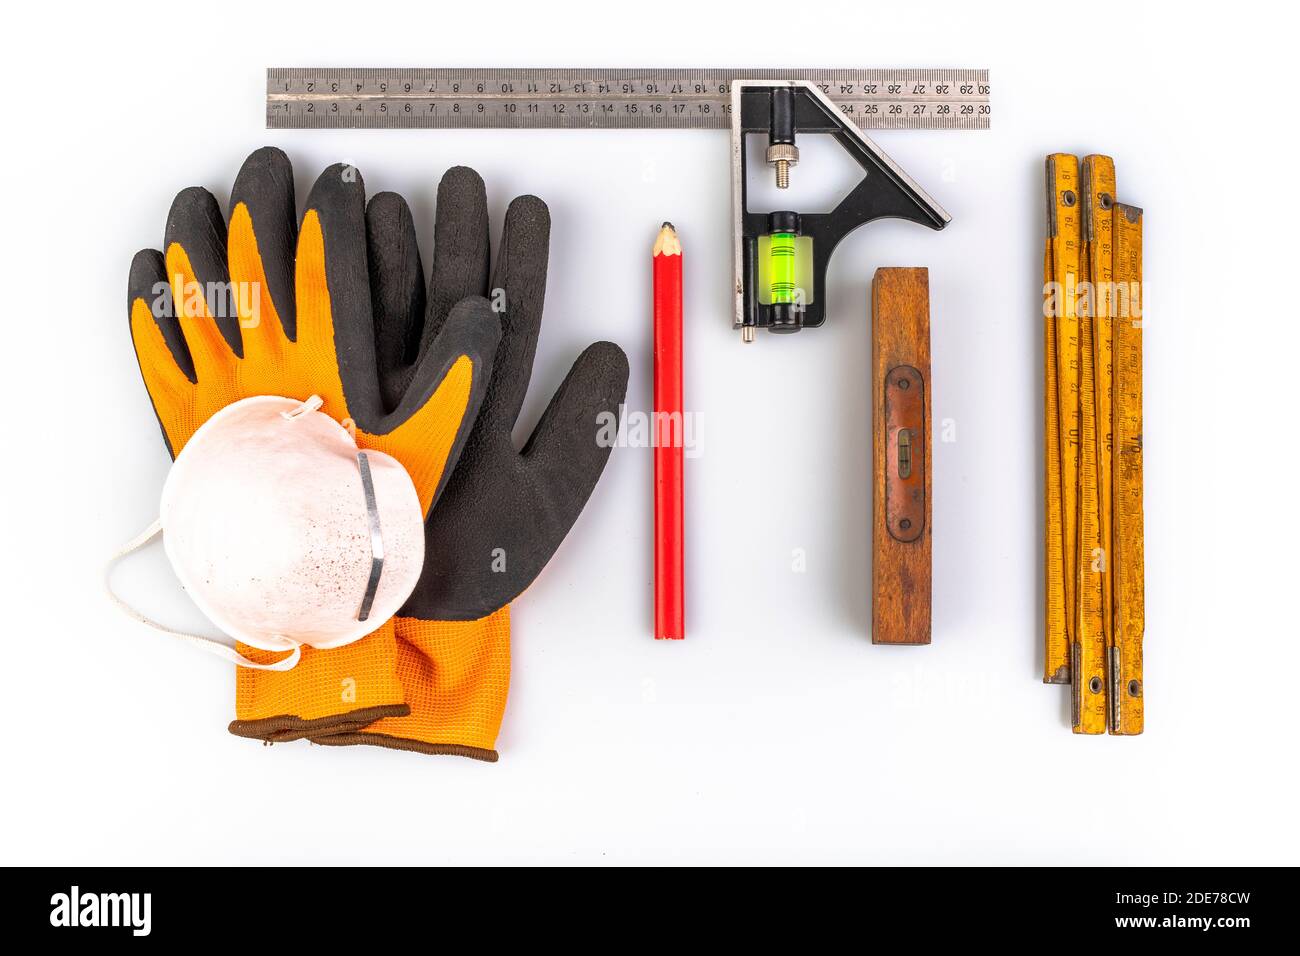 Gloves, tape measure and pencil for carpentry work. Carpentry accessories used in the workshop. Light background. Stock Photo